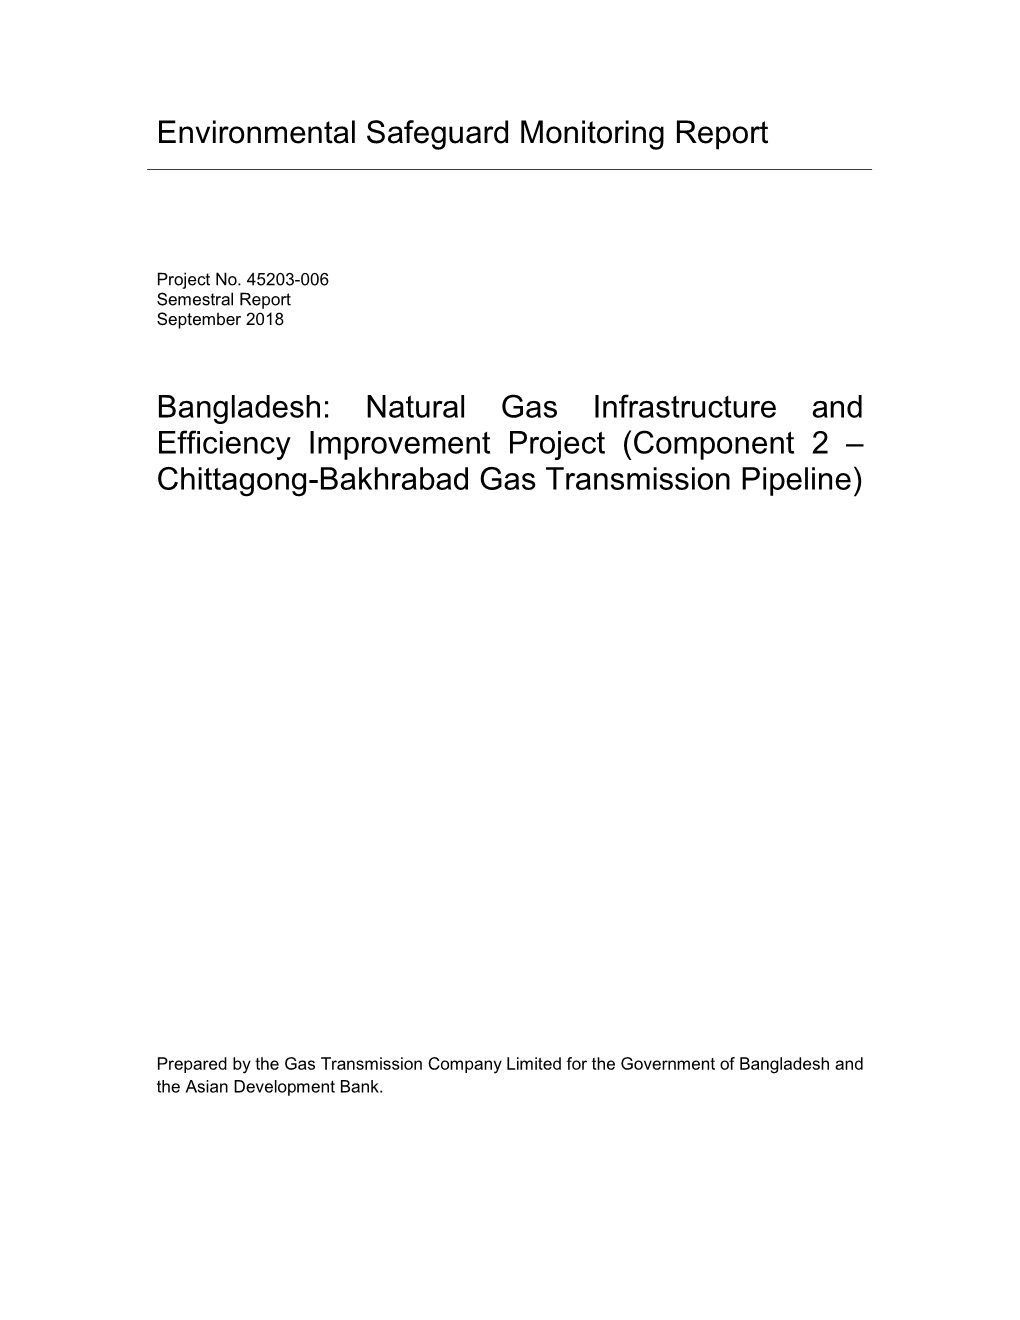 45203-006: Natural Gas Infrastructure and Efficiency Improvement Project